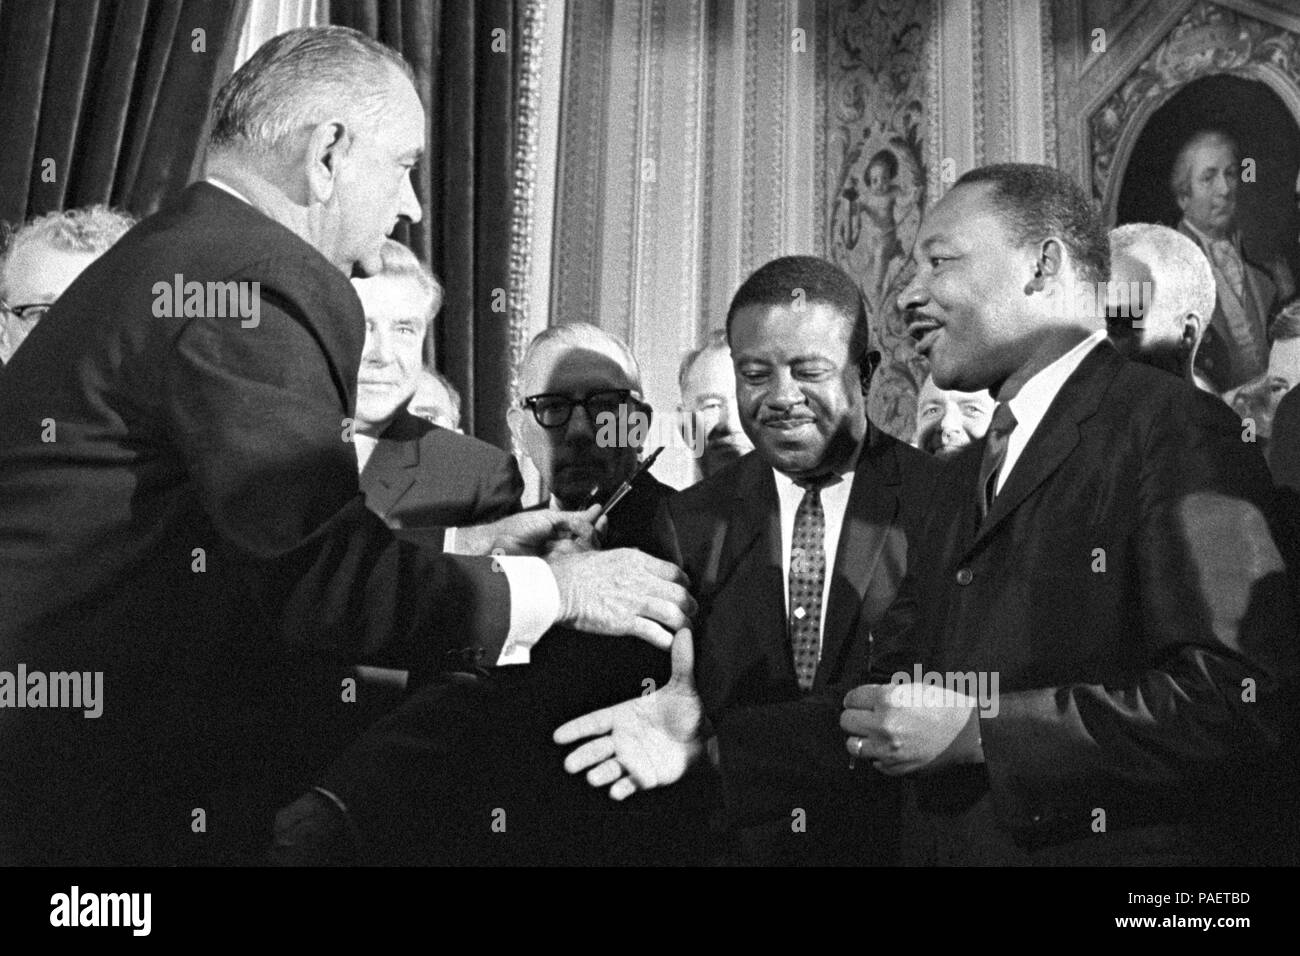 President Lyndon B. Johnson moves to shake hands with Dr. Martin Luther King after the signing of the Voting Rights Act on August 6, 1965 in the President's Room of the U.S. Capitol in Washington, D.C. Stock Photo